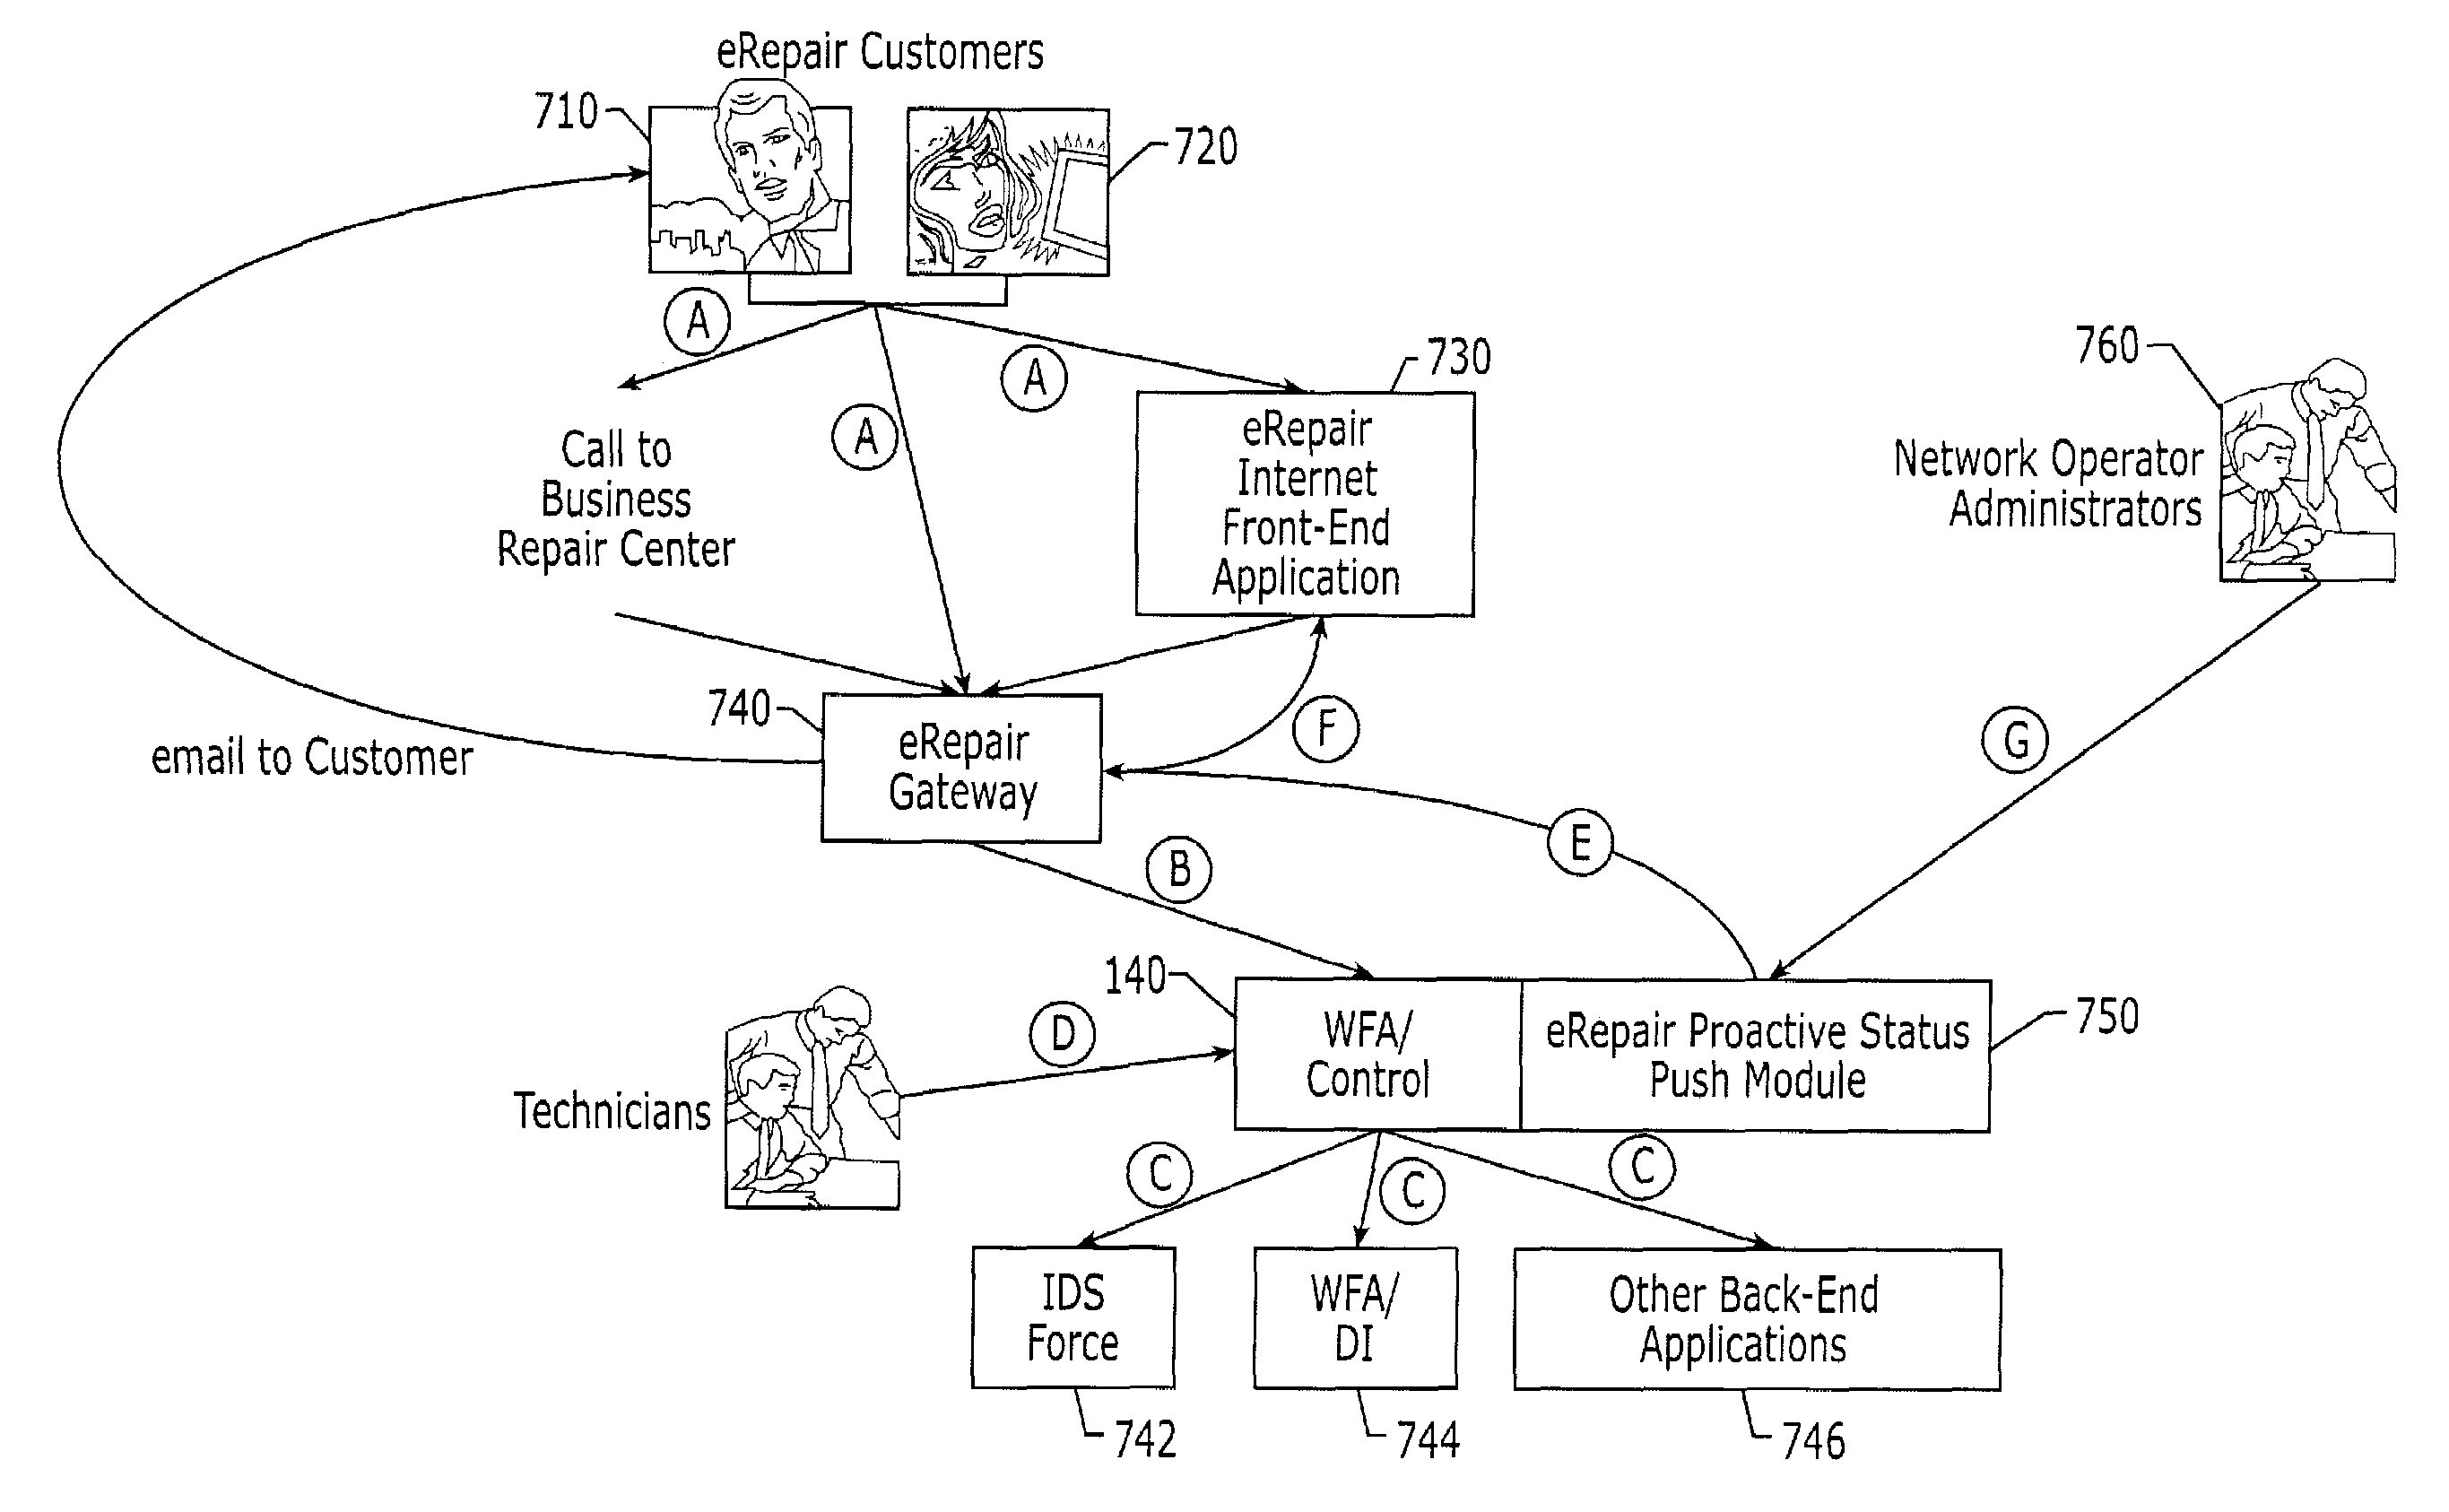 Systems, methods and computer program products for automatically pushing a status change message as a result of repair services that are performed on a public switched telephone network (PSTN)